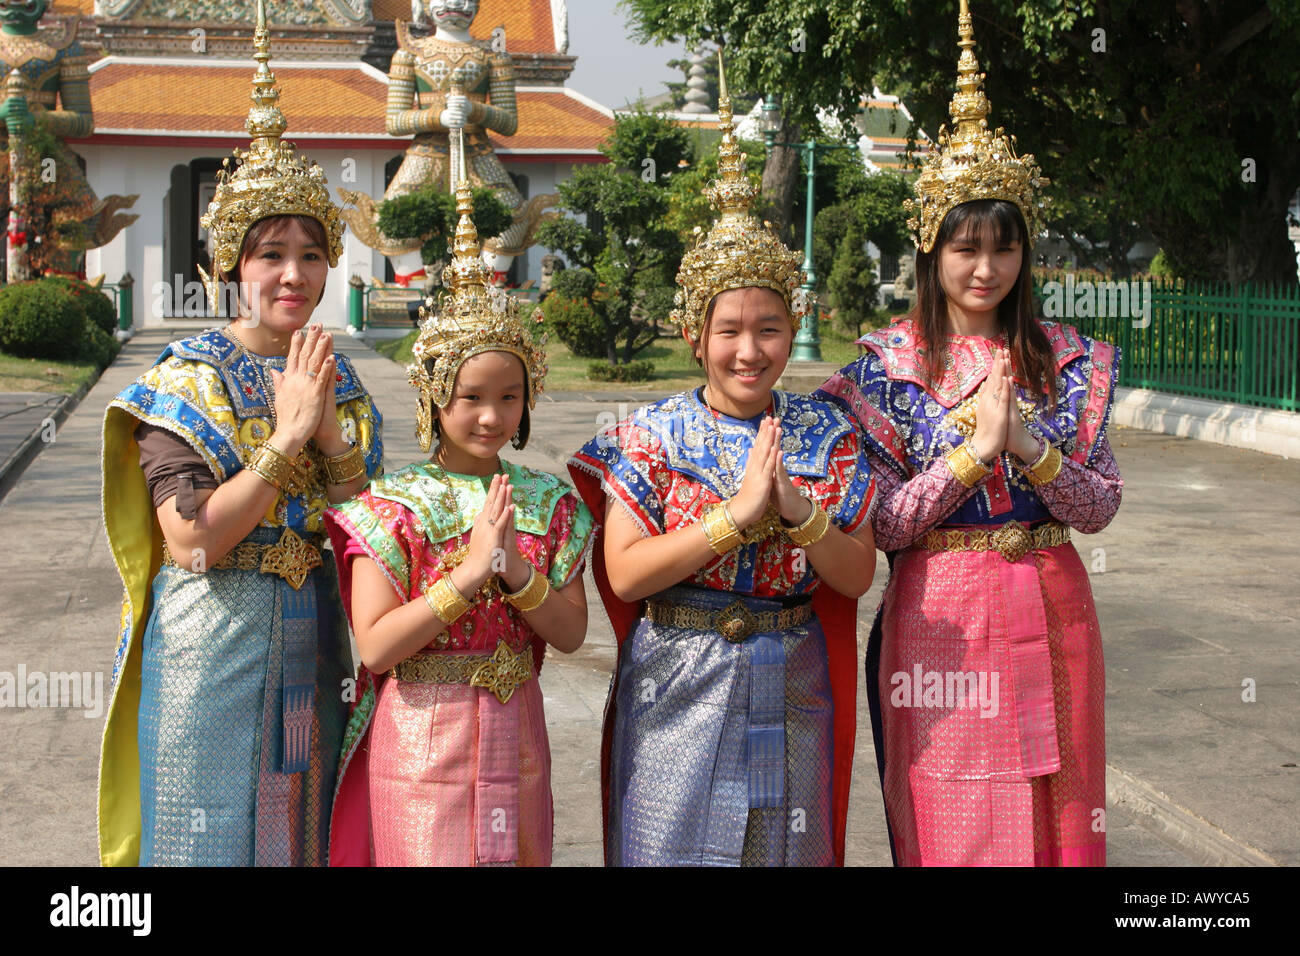 Tourists Pose in Traditional Costume Bangkok Thailand Stock Photo - Alamy